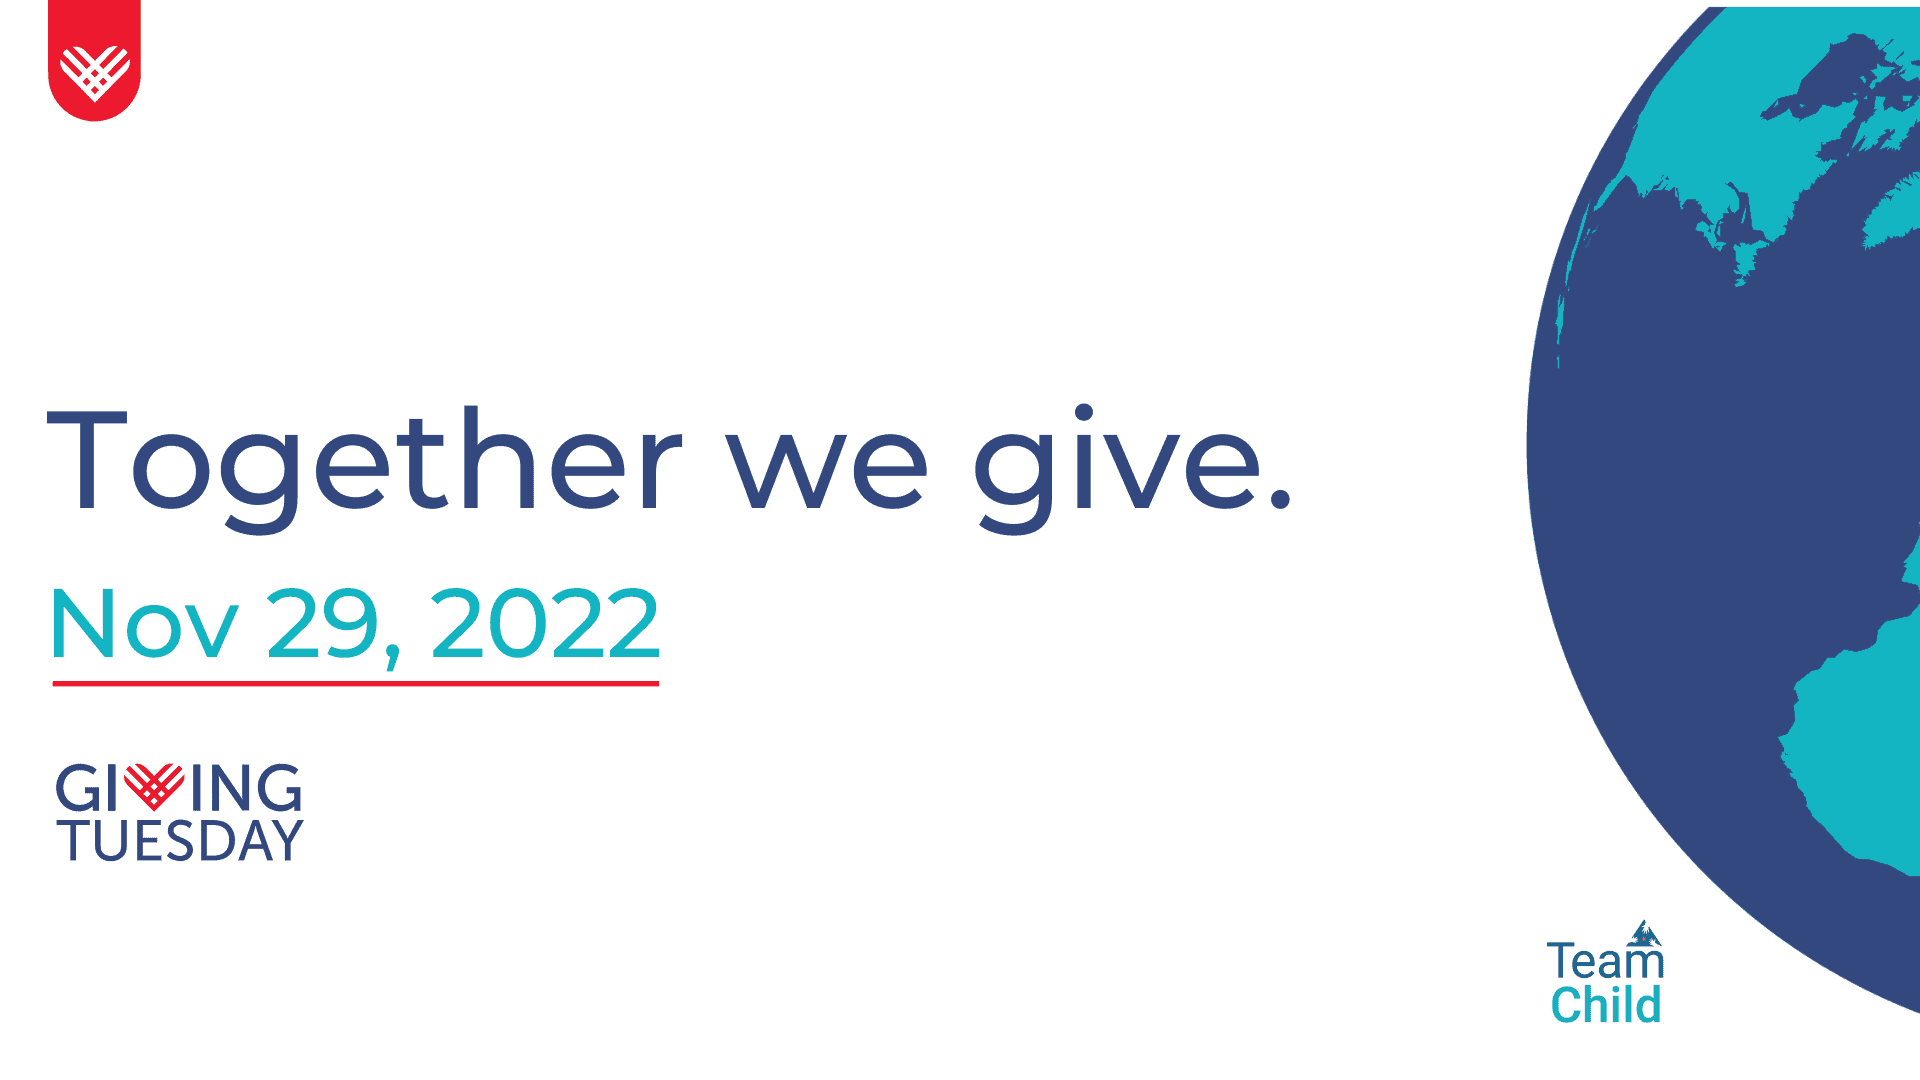 A turquoise and blue globe is pictured on the right. Text reads: Together we give. November 29, 2022. GivingTuesday logo appears on left and TeamChild logo appears on right.